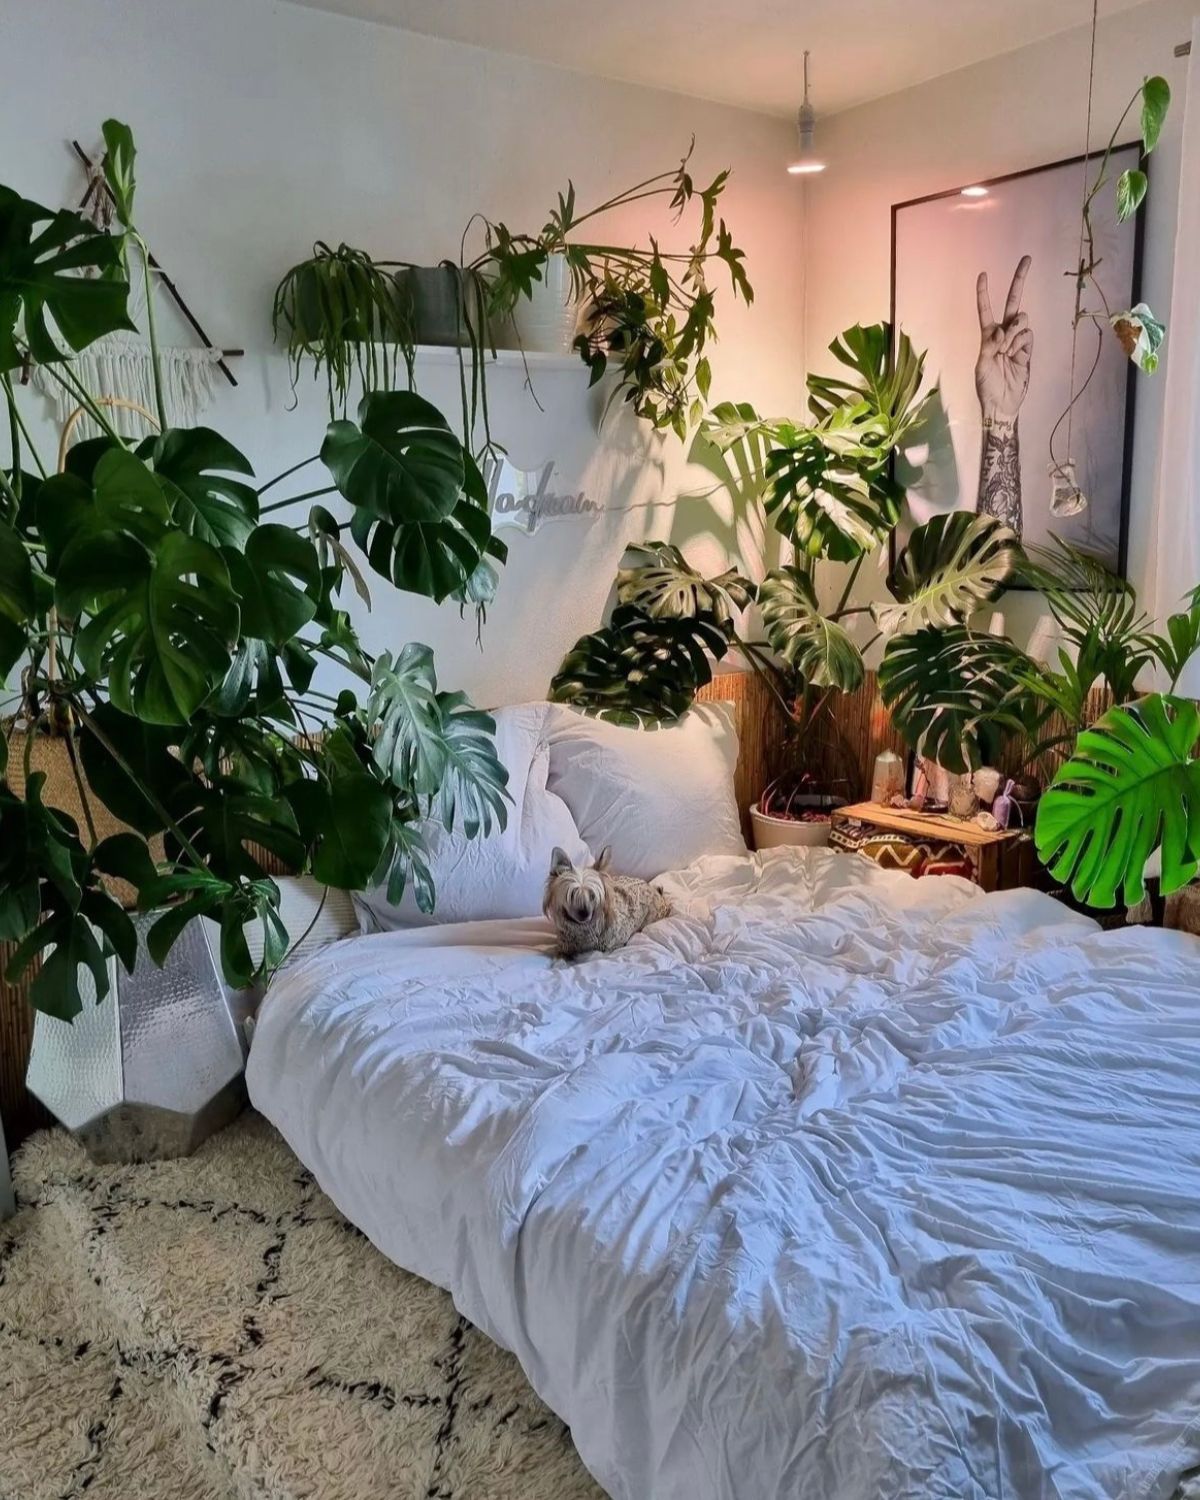 17 White Bedroom Ideas With Plants For A Sleep Sanctuary - Sleek-chic ...